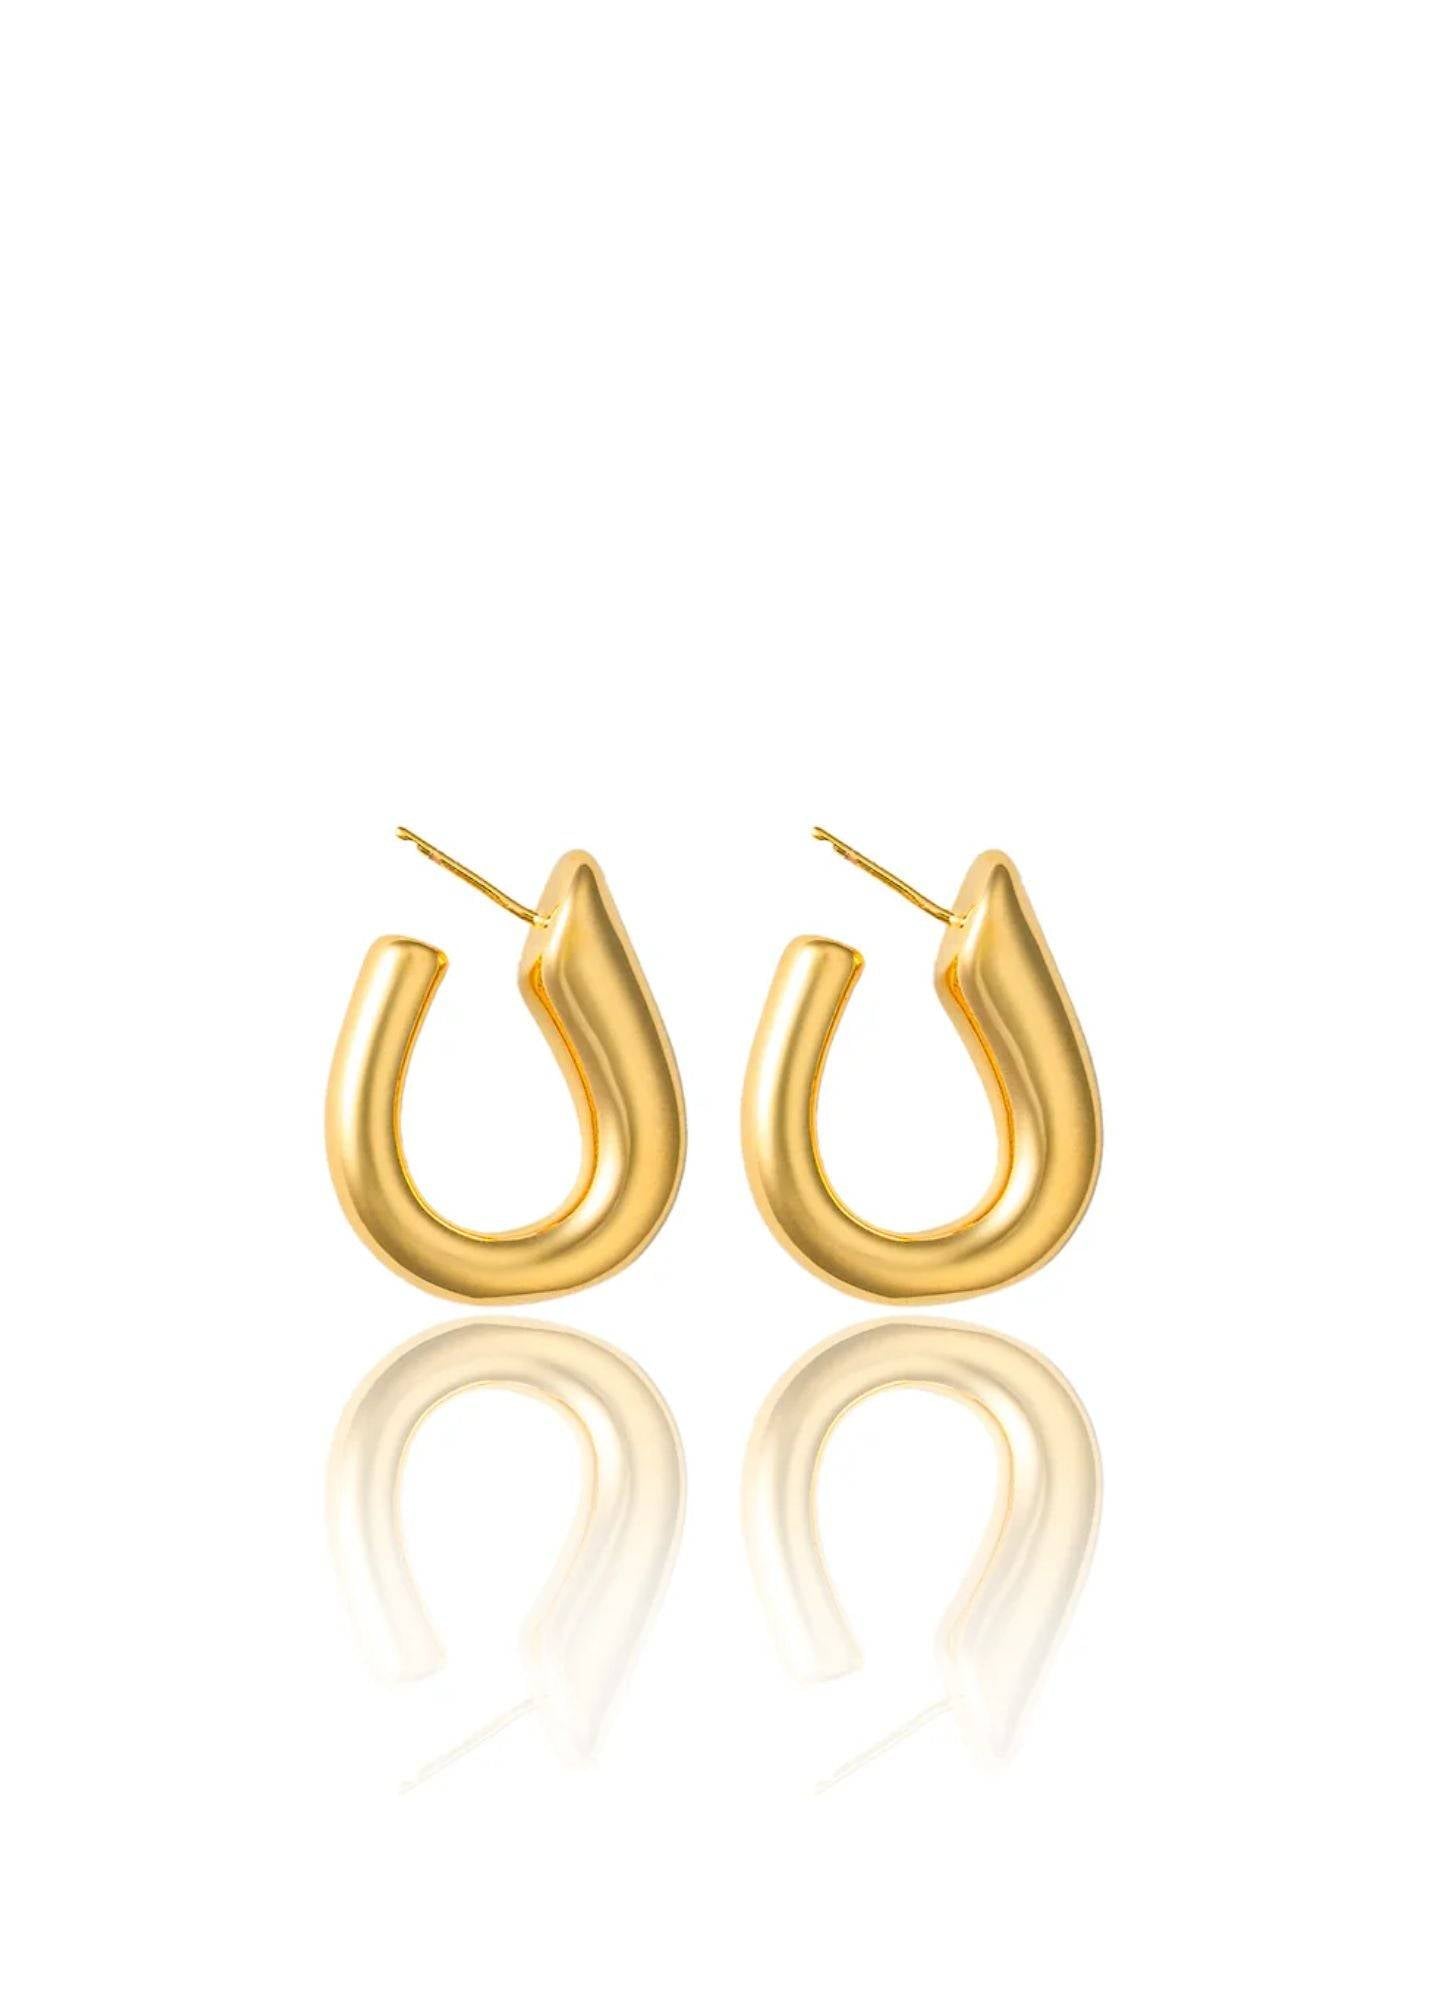 Horseshoe Gold Filled Earrings in 18K Gold Filled with Brass Base from inaury.com